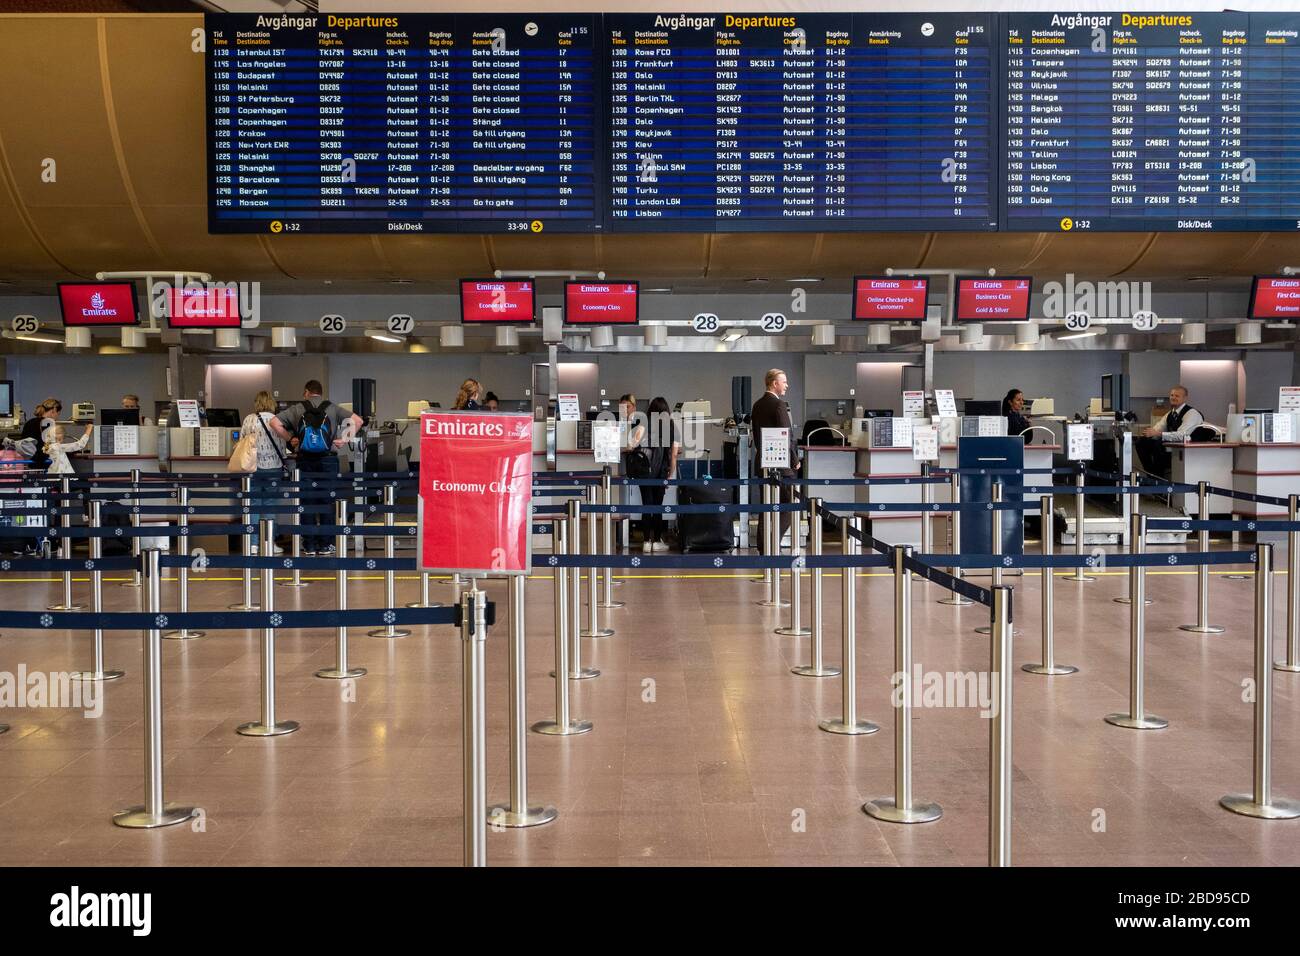 Stockholm Arland Airport check-in counters in Stockholm, Sweden, Europe Stock Photo